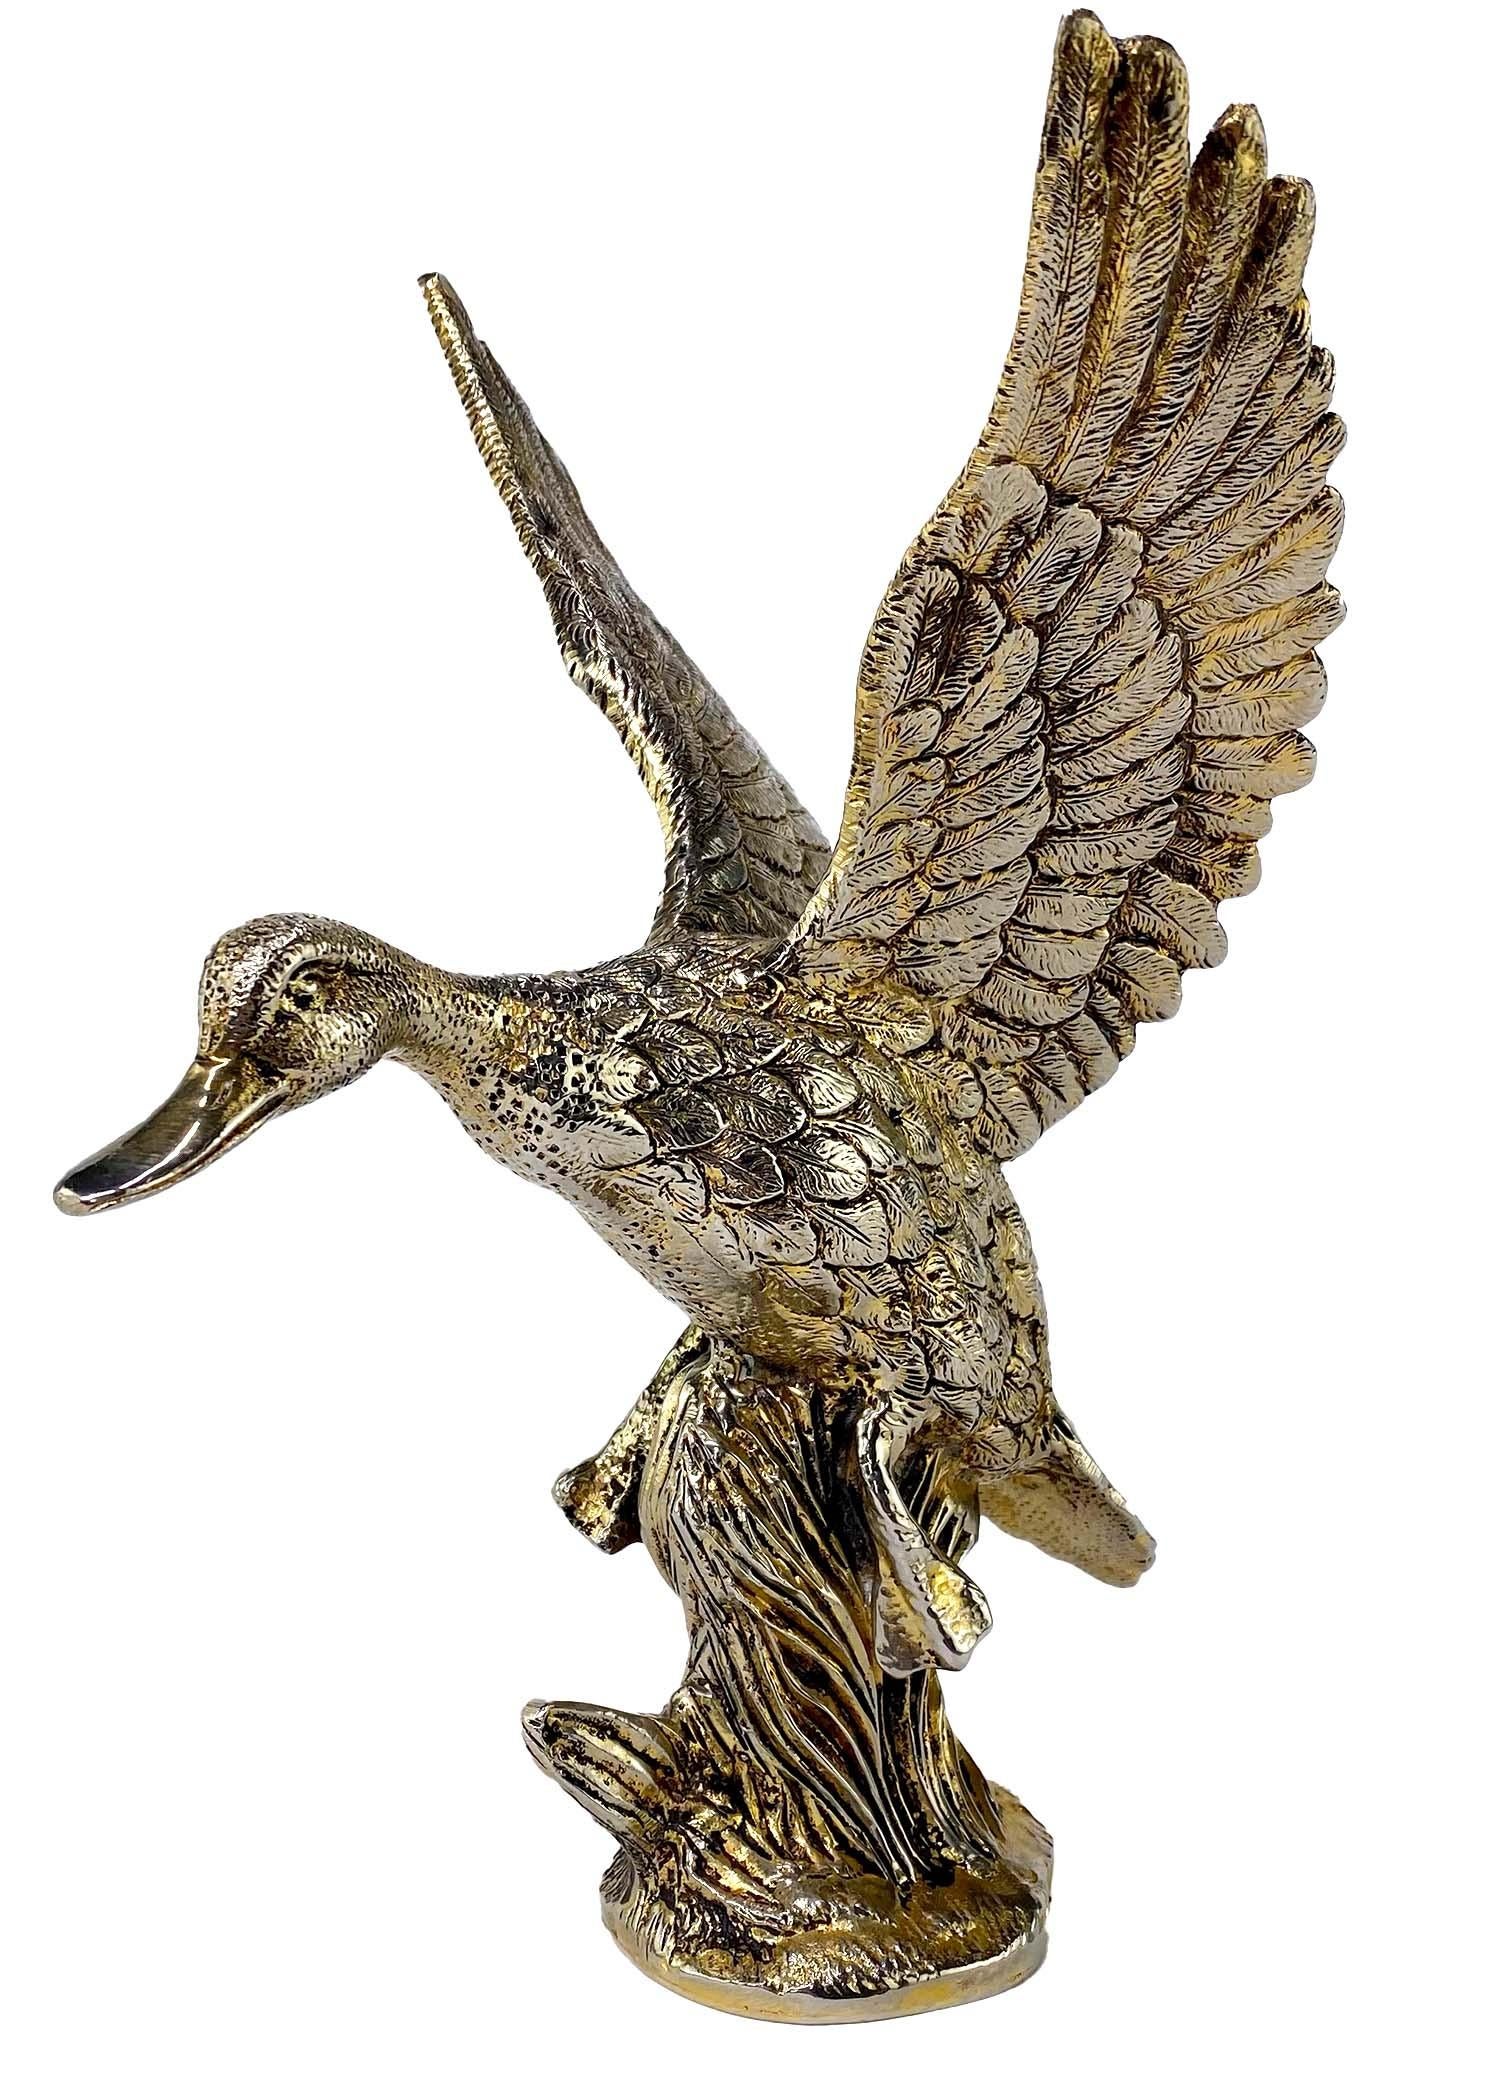 Presenting a gold-washed mallard duck sculpture from the 1970s. The metal model takes the country and equestrian influences of early Gucci and elevates them making them chic and shiny. This statue features a duck taking flight in grass. The